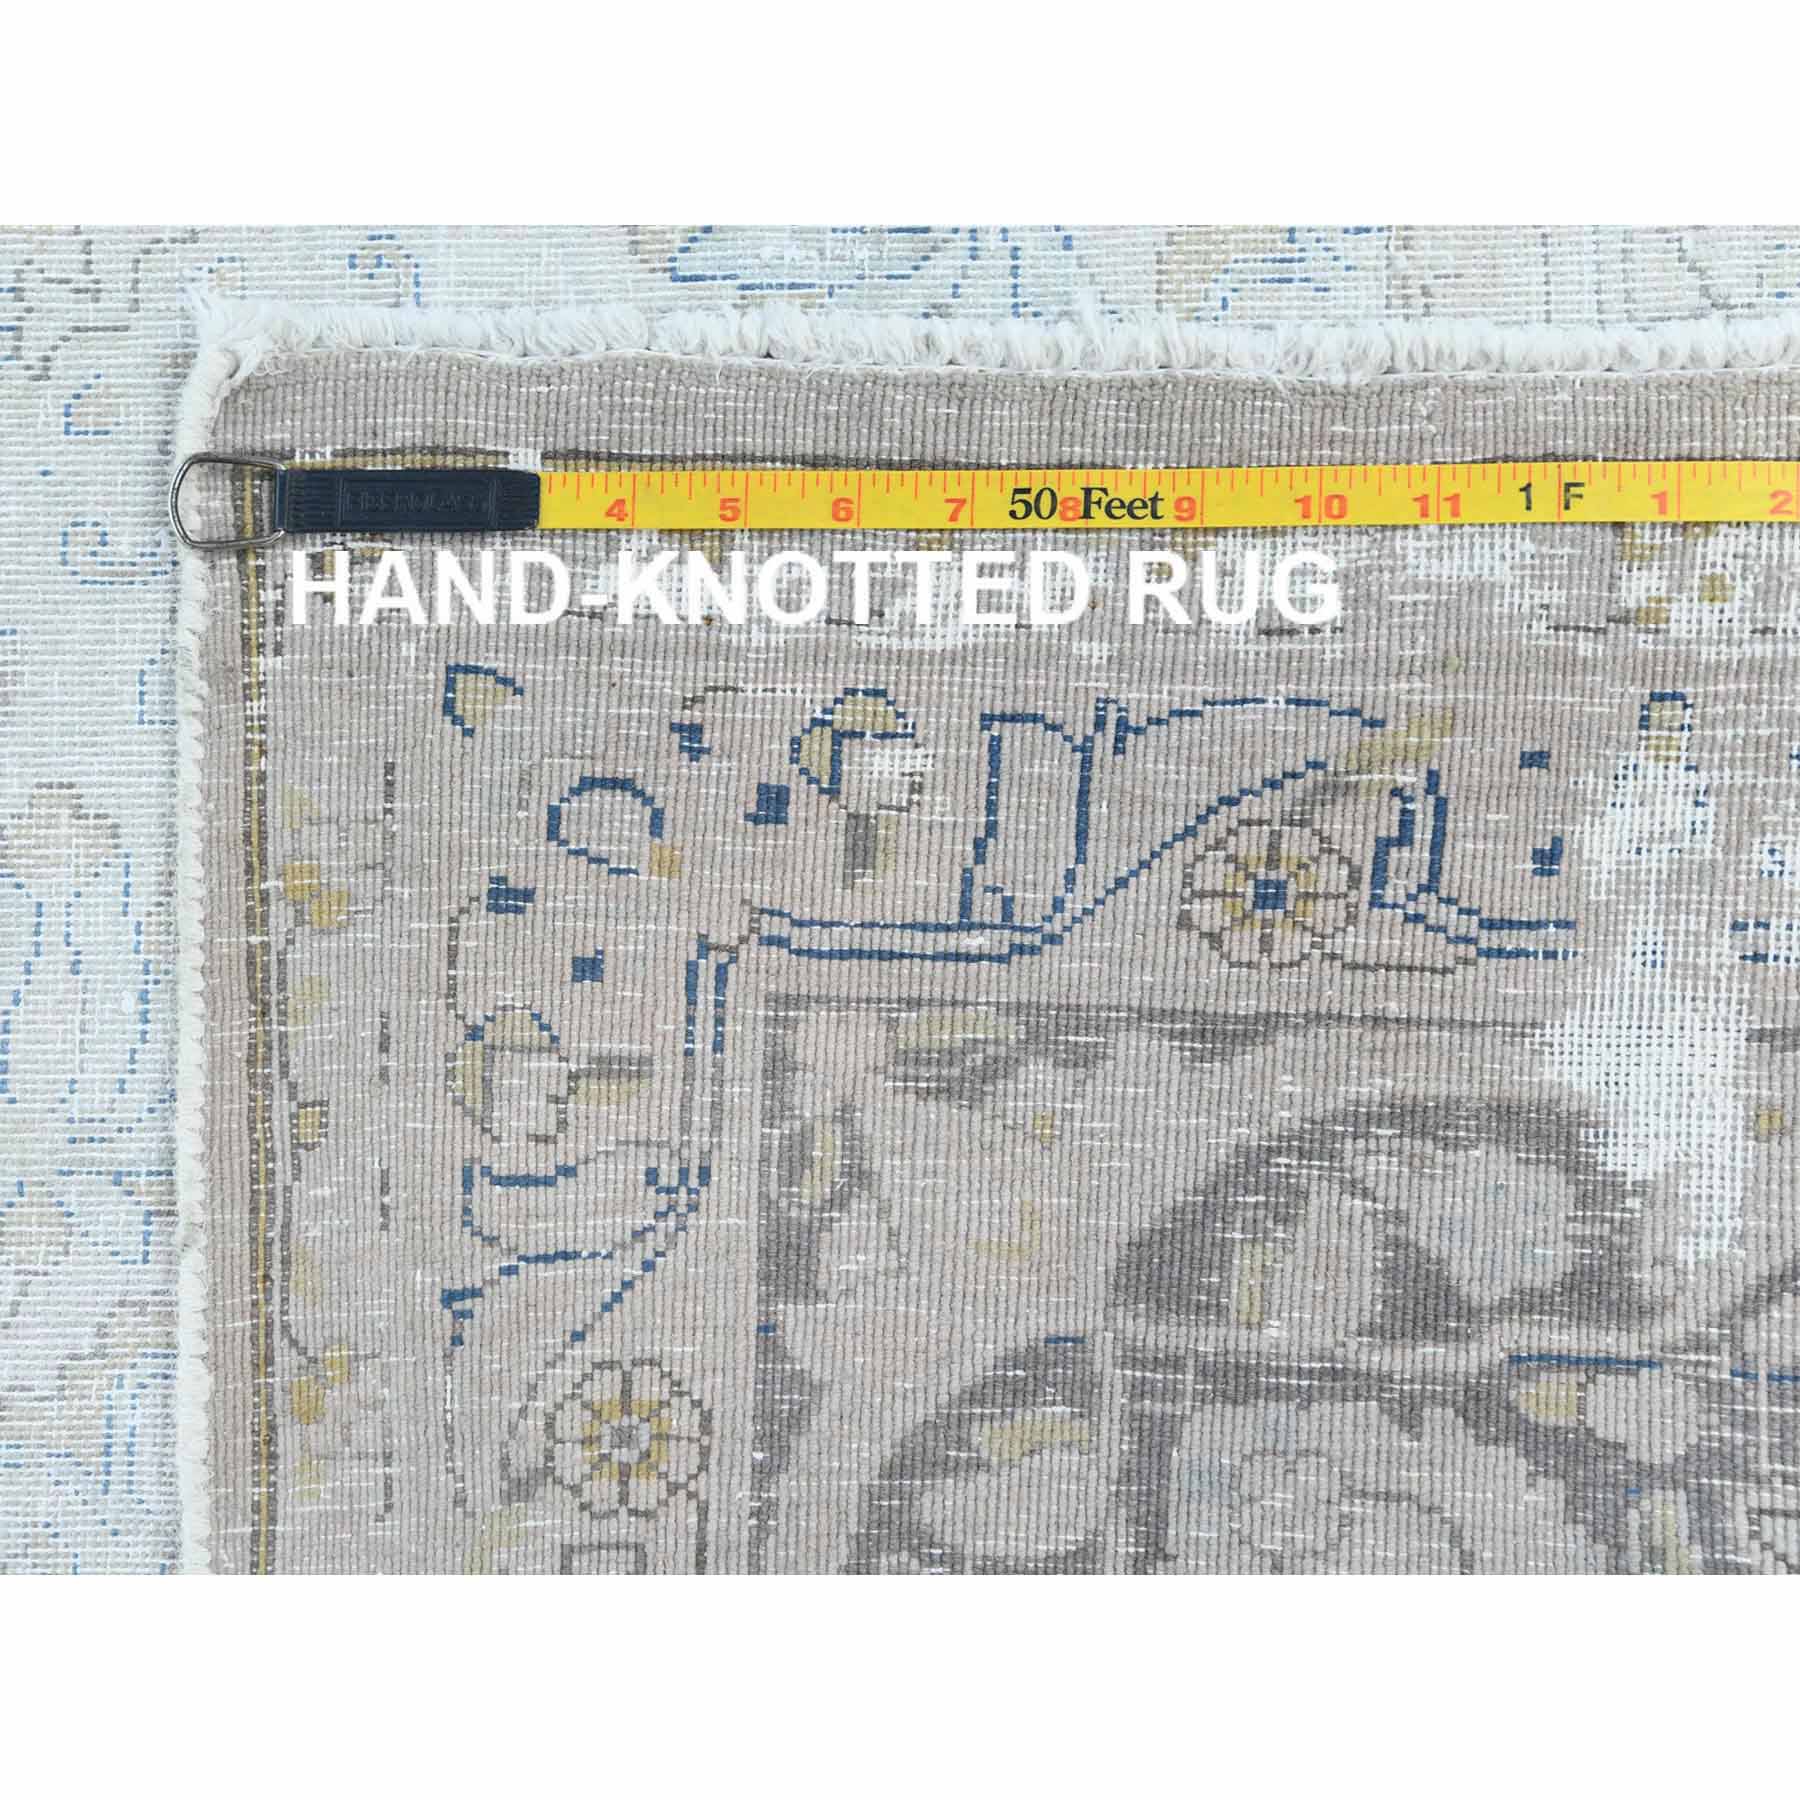 Overdyed-Vintage-Hand-Knotted-Rug-408120